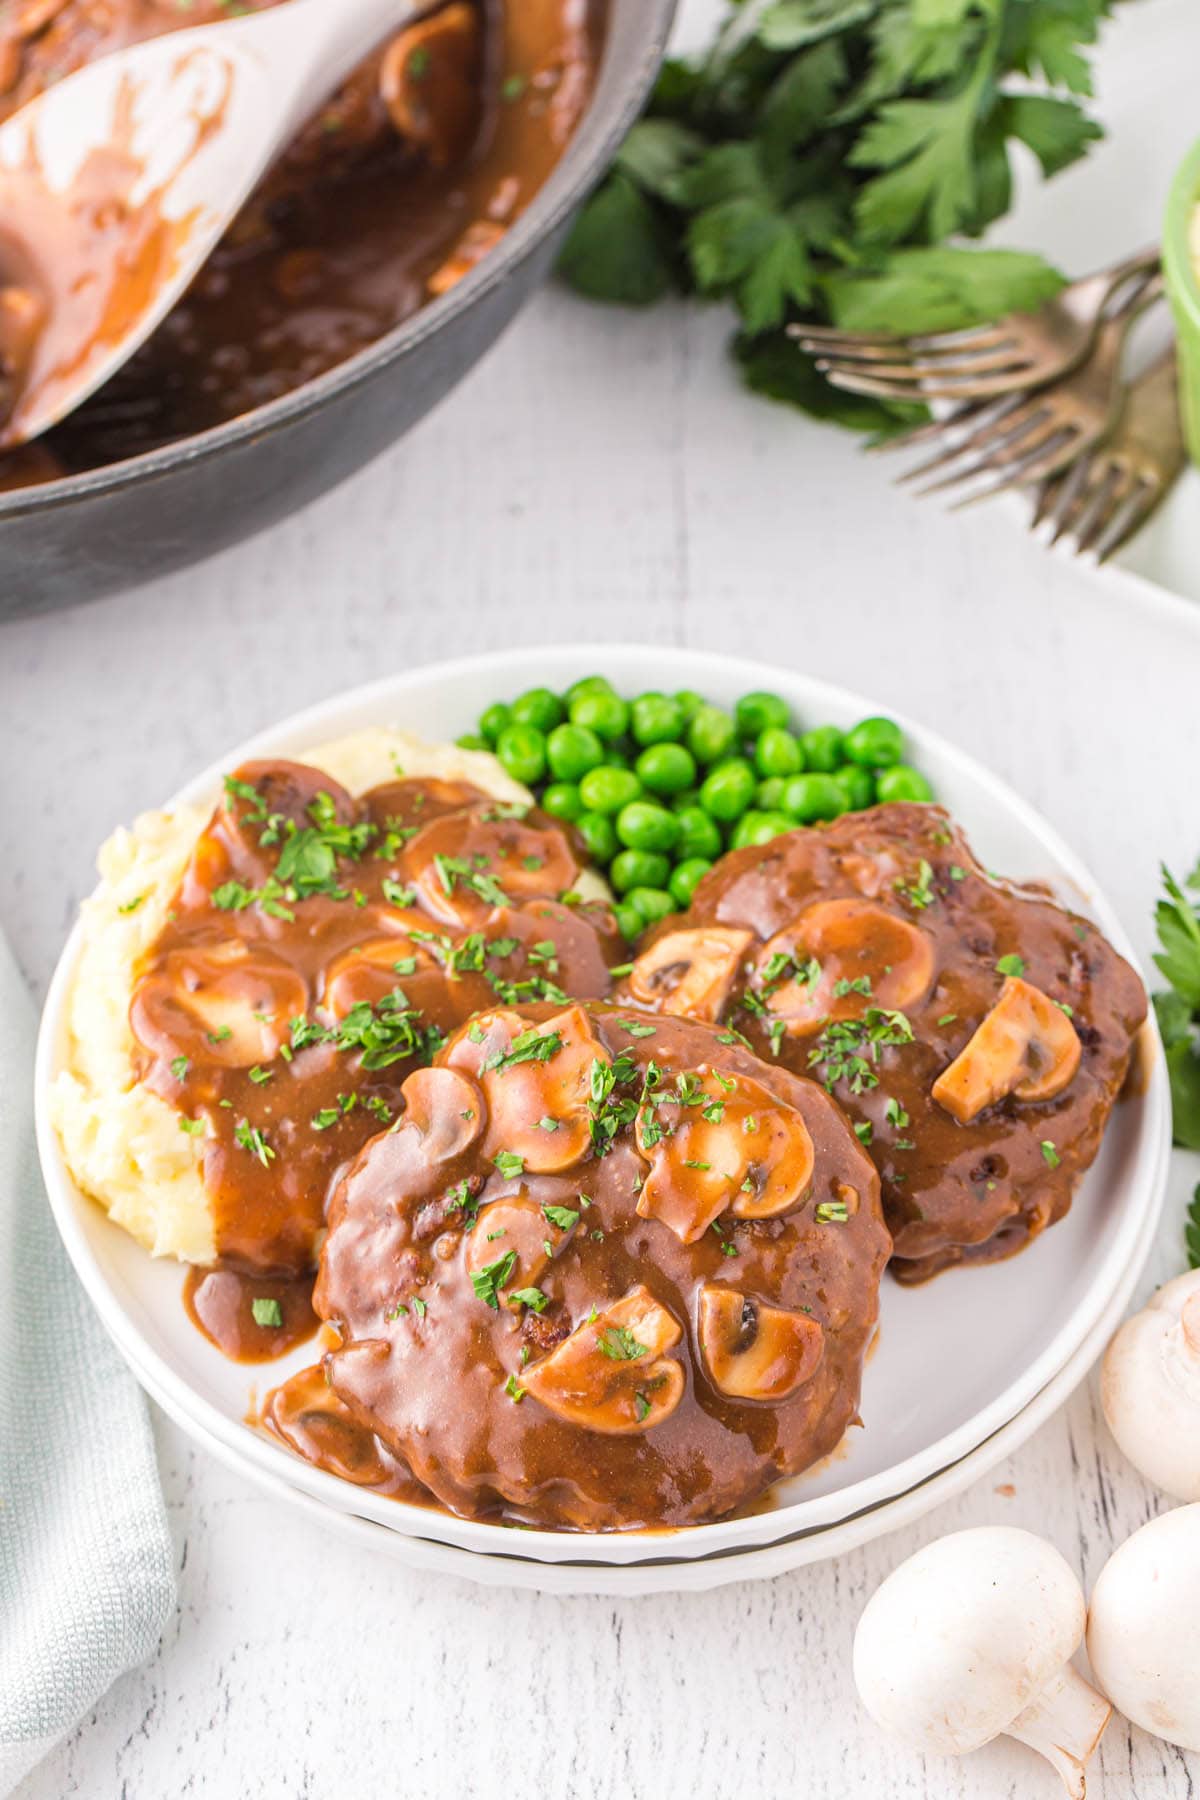 A bowl of food on a plate, with Salisbury steak